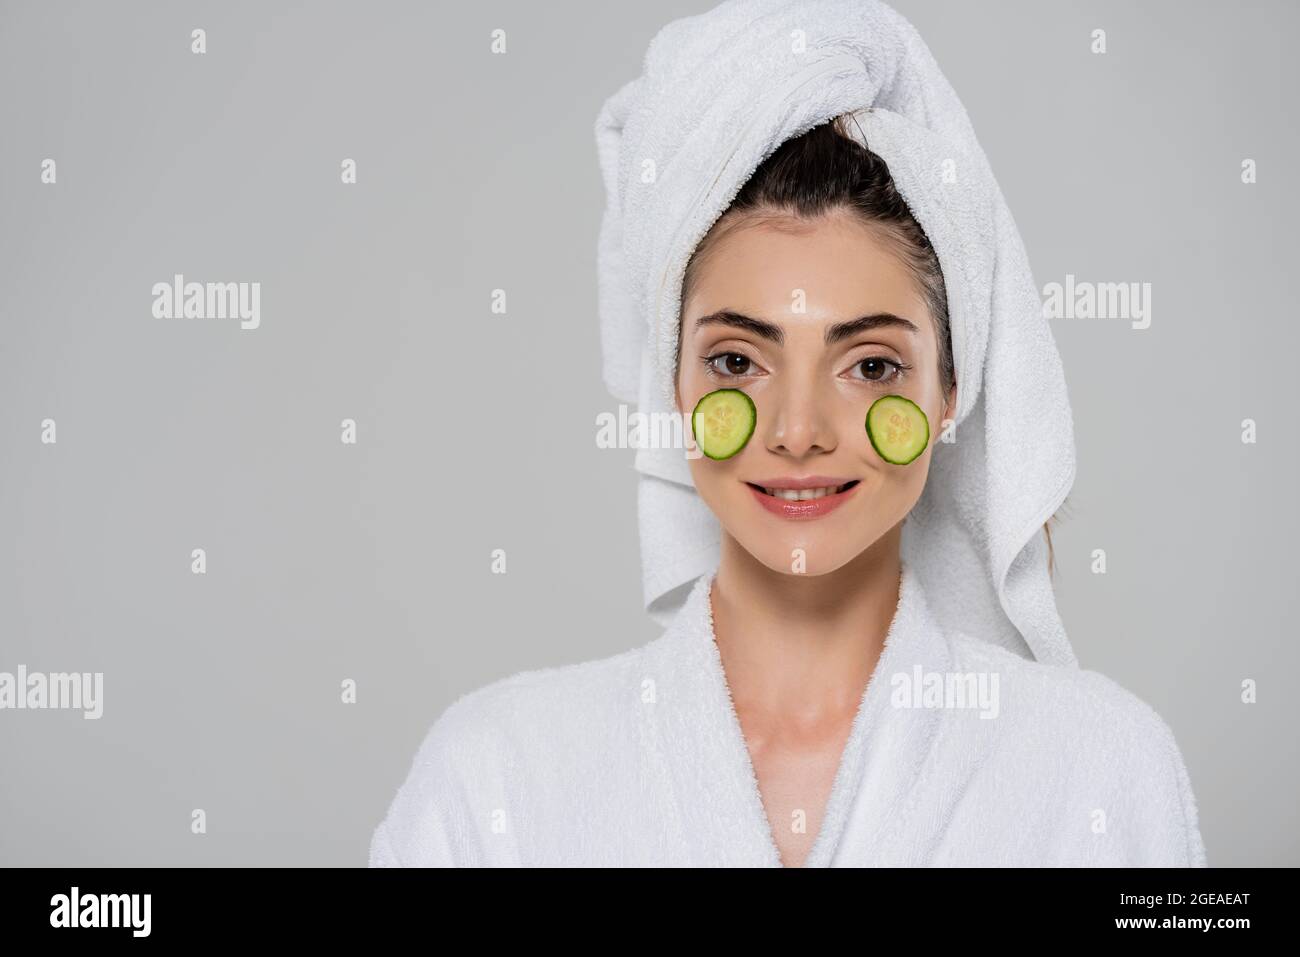 smiling young woman with towel on head and sliced cucumber on face isolated on grey Stock Photo